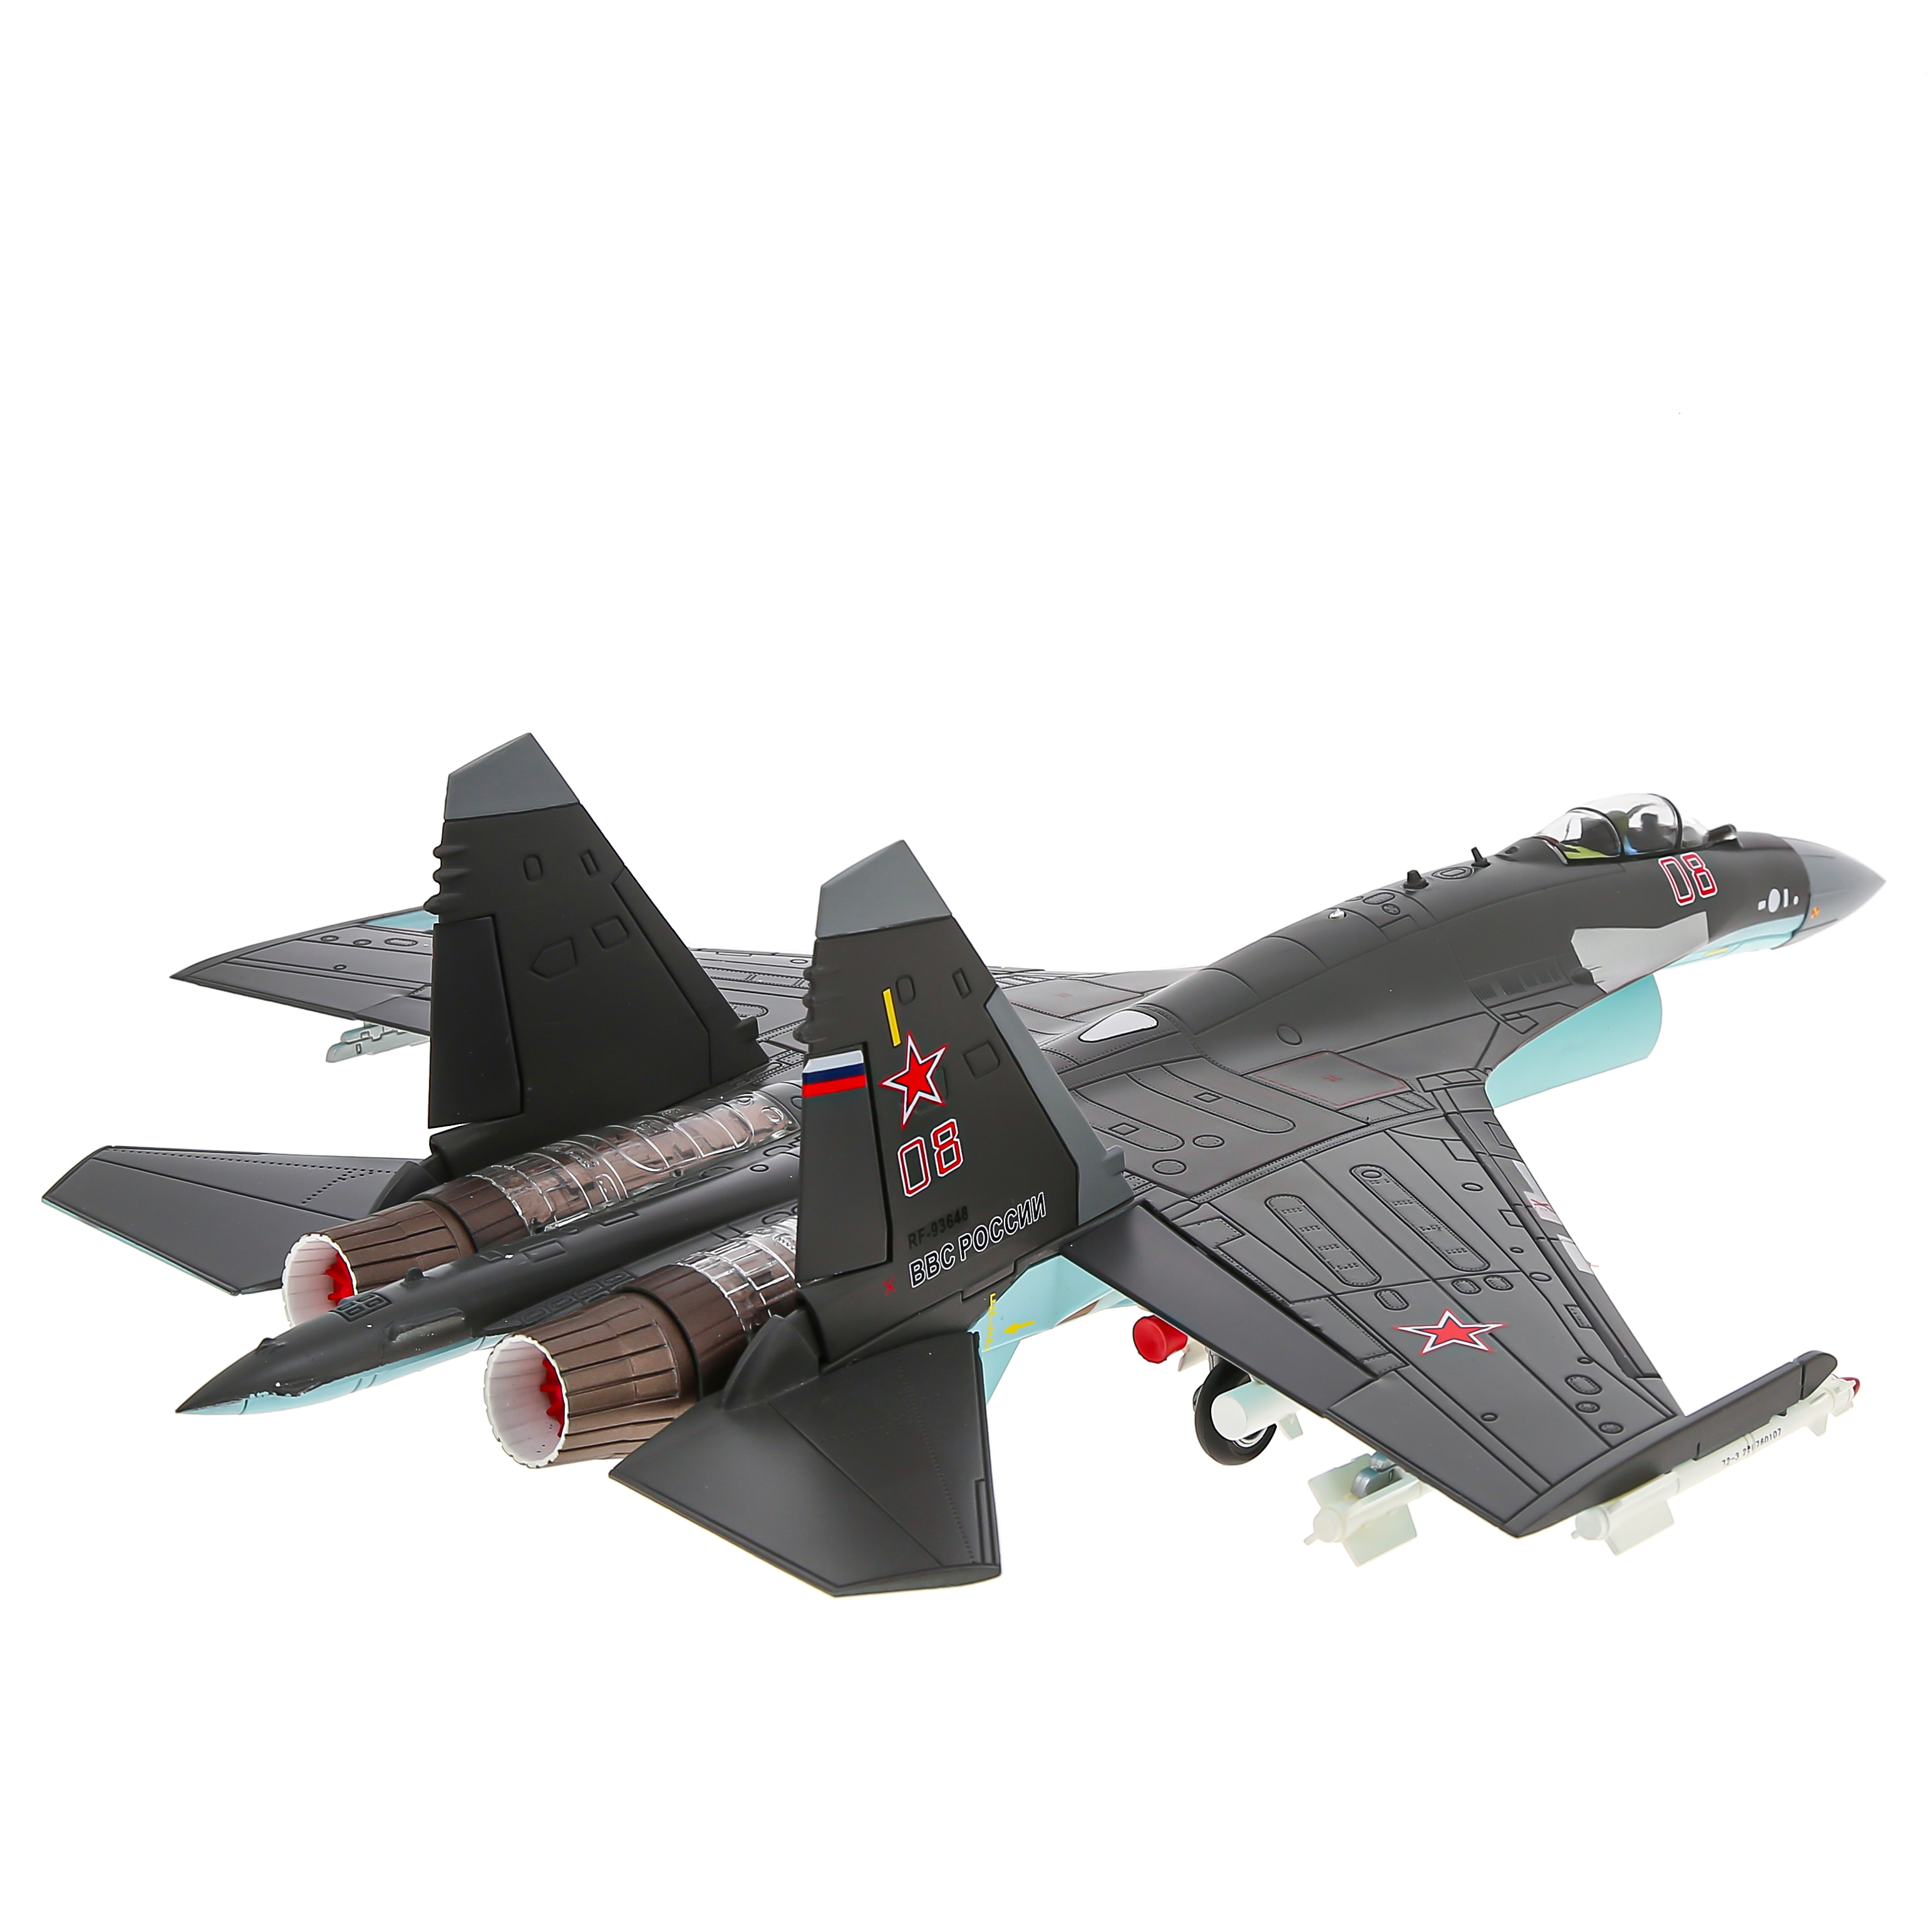       -35 ,  1:48.  47 . Large metal model of a Russian Su-35 fighter airplane, scale 1:48. Length 47 cm. # 5 hobbyplus.ru